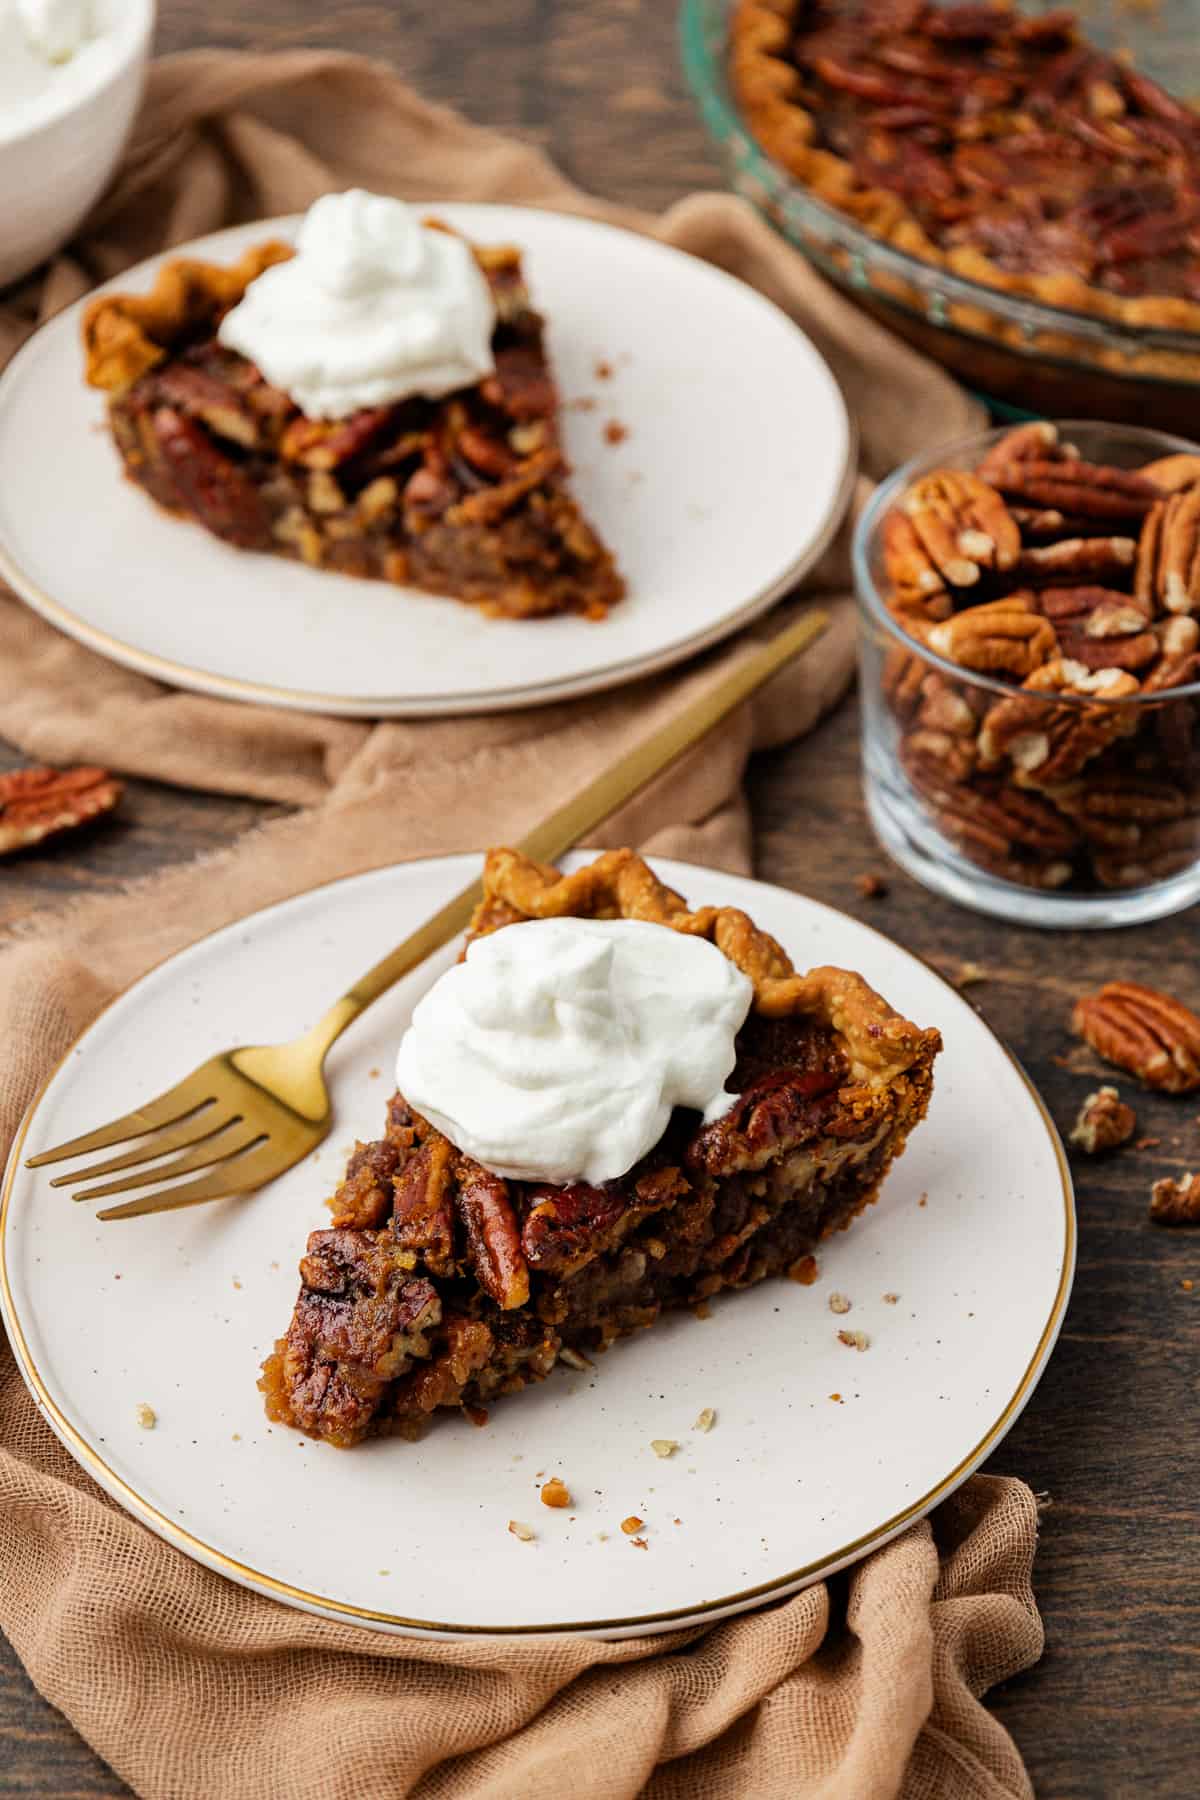 two white plates with pecan pie slices on them, with a fork on the front plate, sitting on top of a tan towel on a wood surface with a glass dish of pecans beside them and more pecans scattered around, and the pie dish with more pie in the background